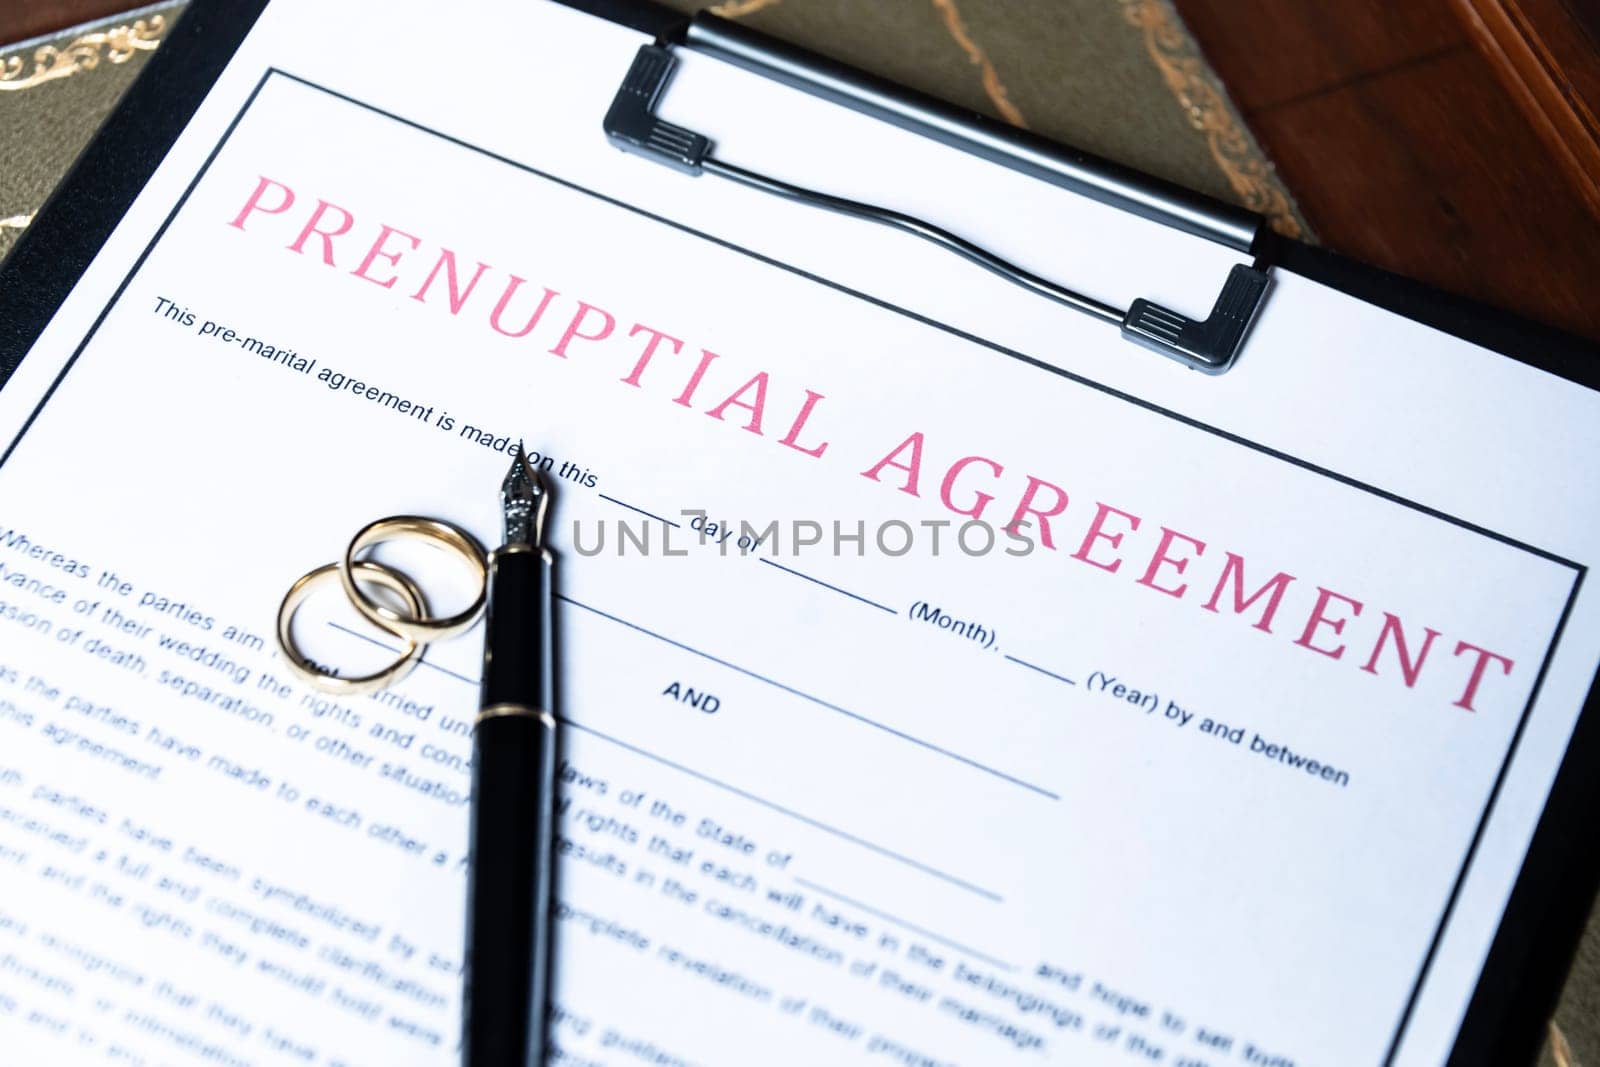 Close-up of a prenuptial agreement form with wedding rings and a fountain pen, indicating the legal aspects of marriage preparation. by jbruiz78